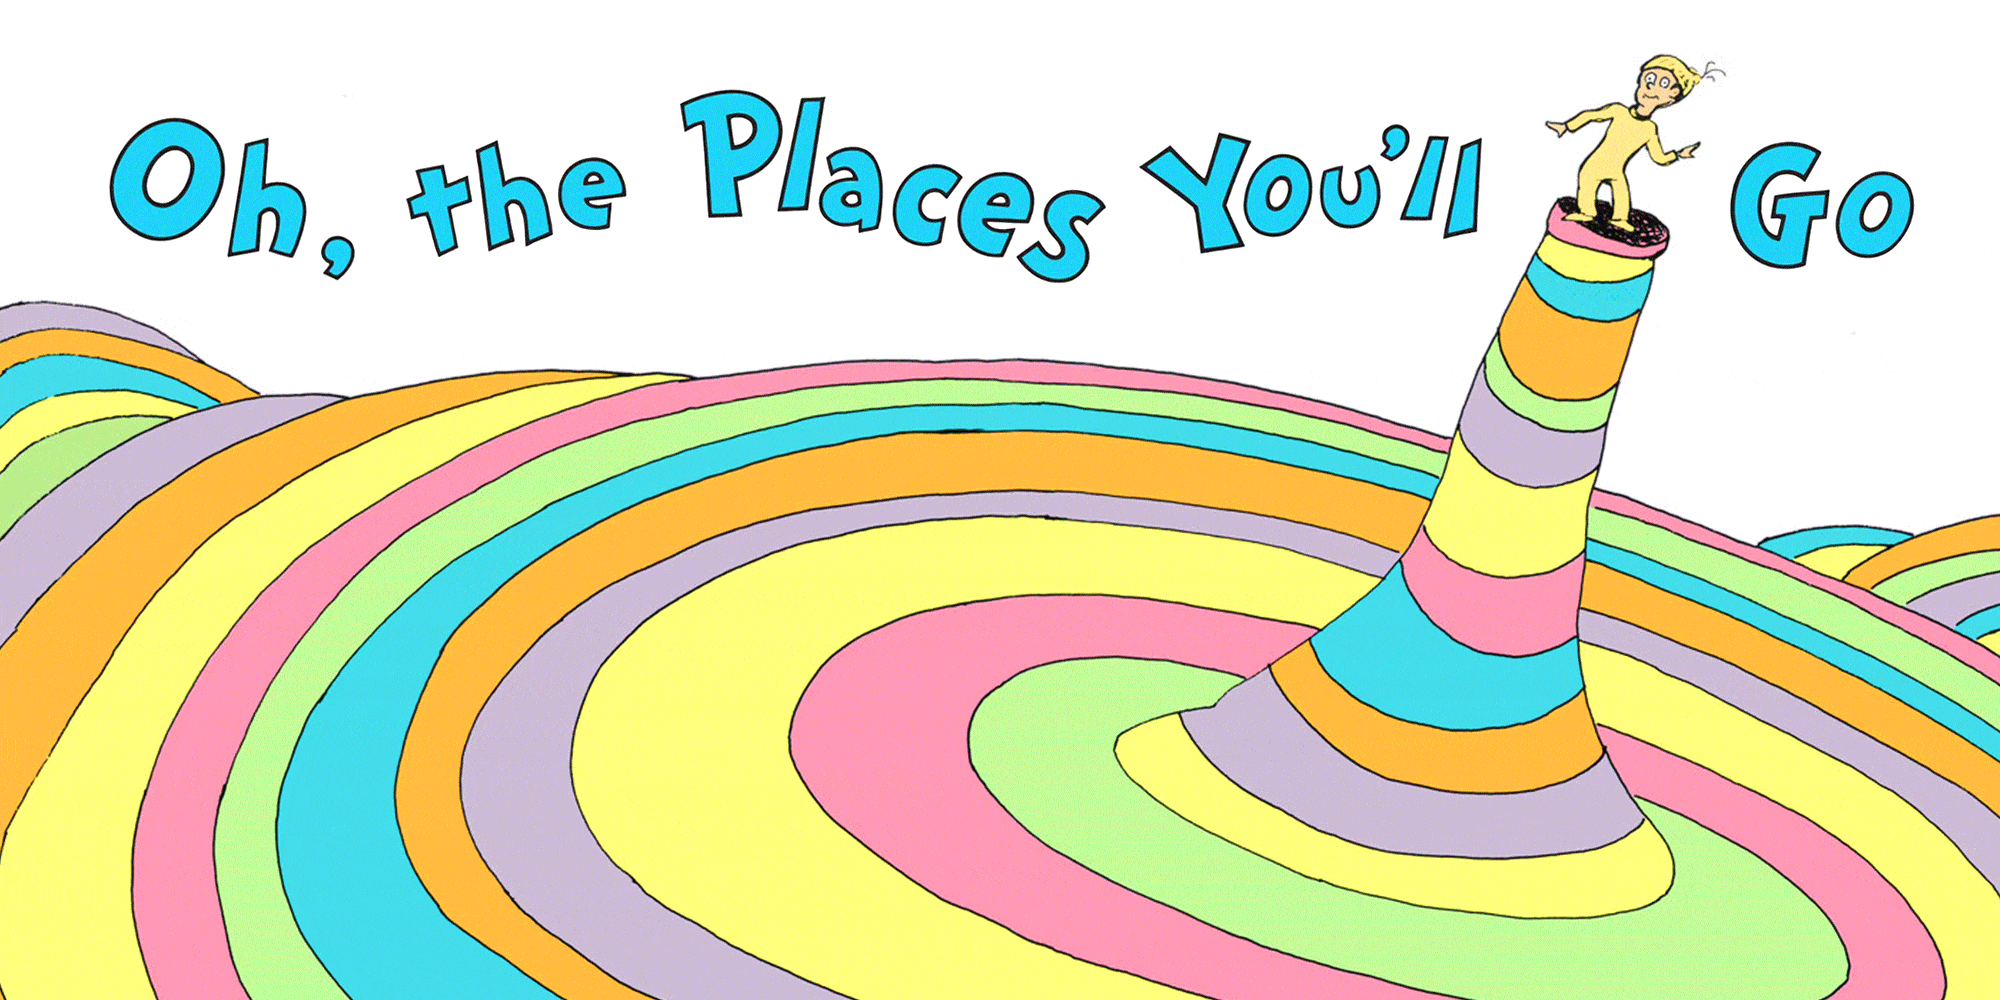 13 Best Dr Seuss Books Of All Time Must Read Books From The Dr Seuss Collection